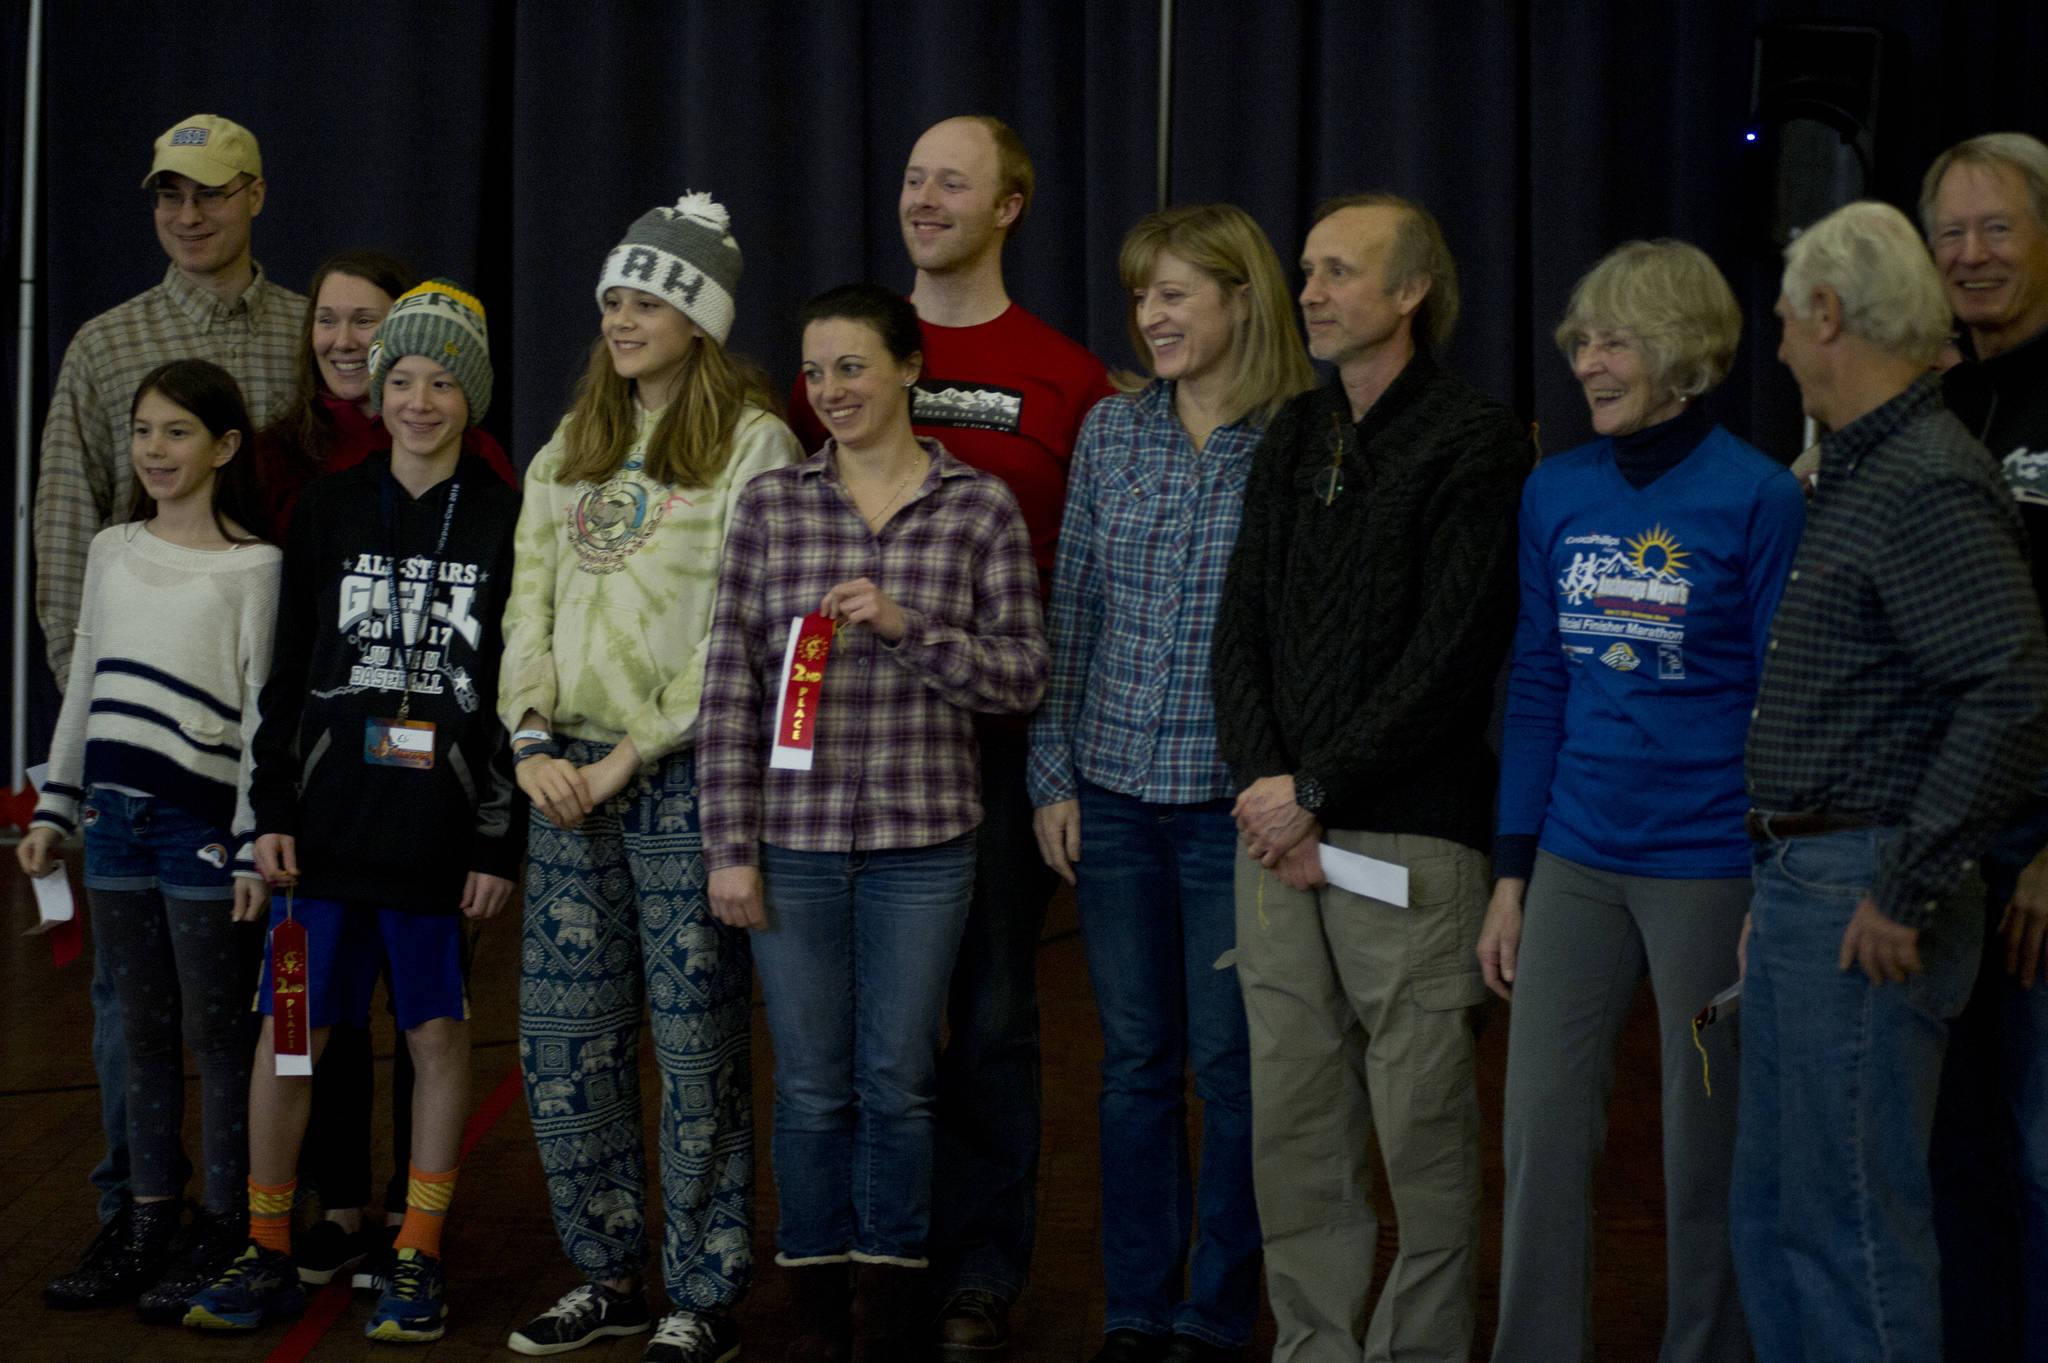 The second-place finishers in the Nugget Alaskan Outfitter Cup Series pose for a picture at the Juneau Trail and Road Runners potluck and awards ceremony Saturday, Jan. 27, at the Juneau Arts and Culture Center. (Nolin Ainsworth | Juneau Empire)